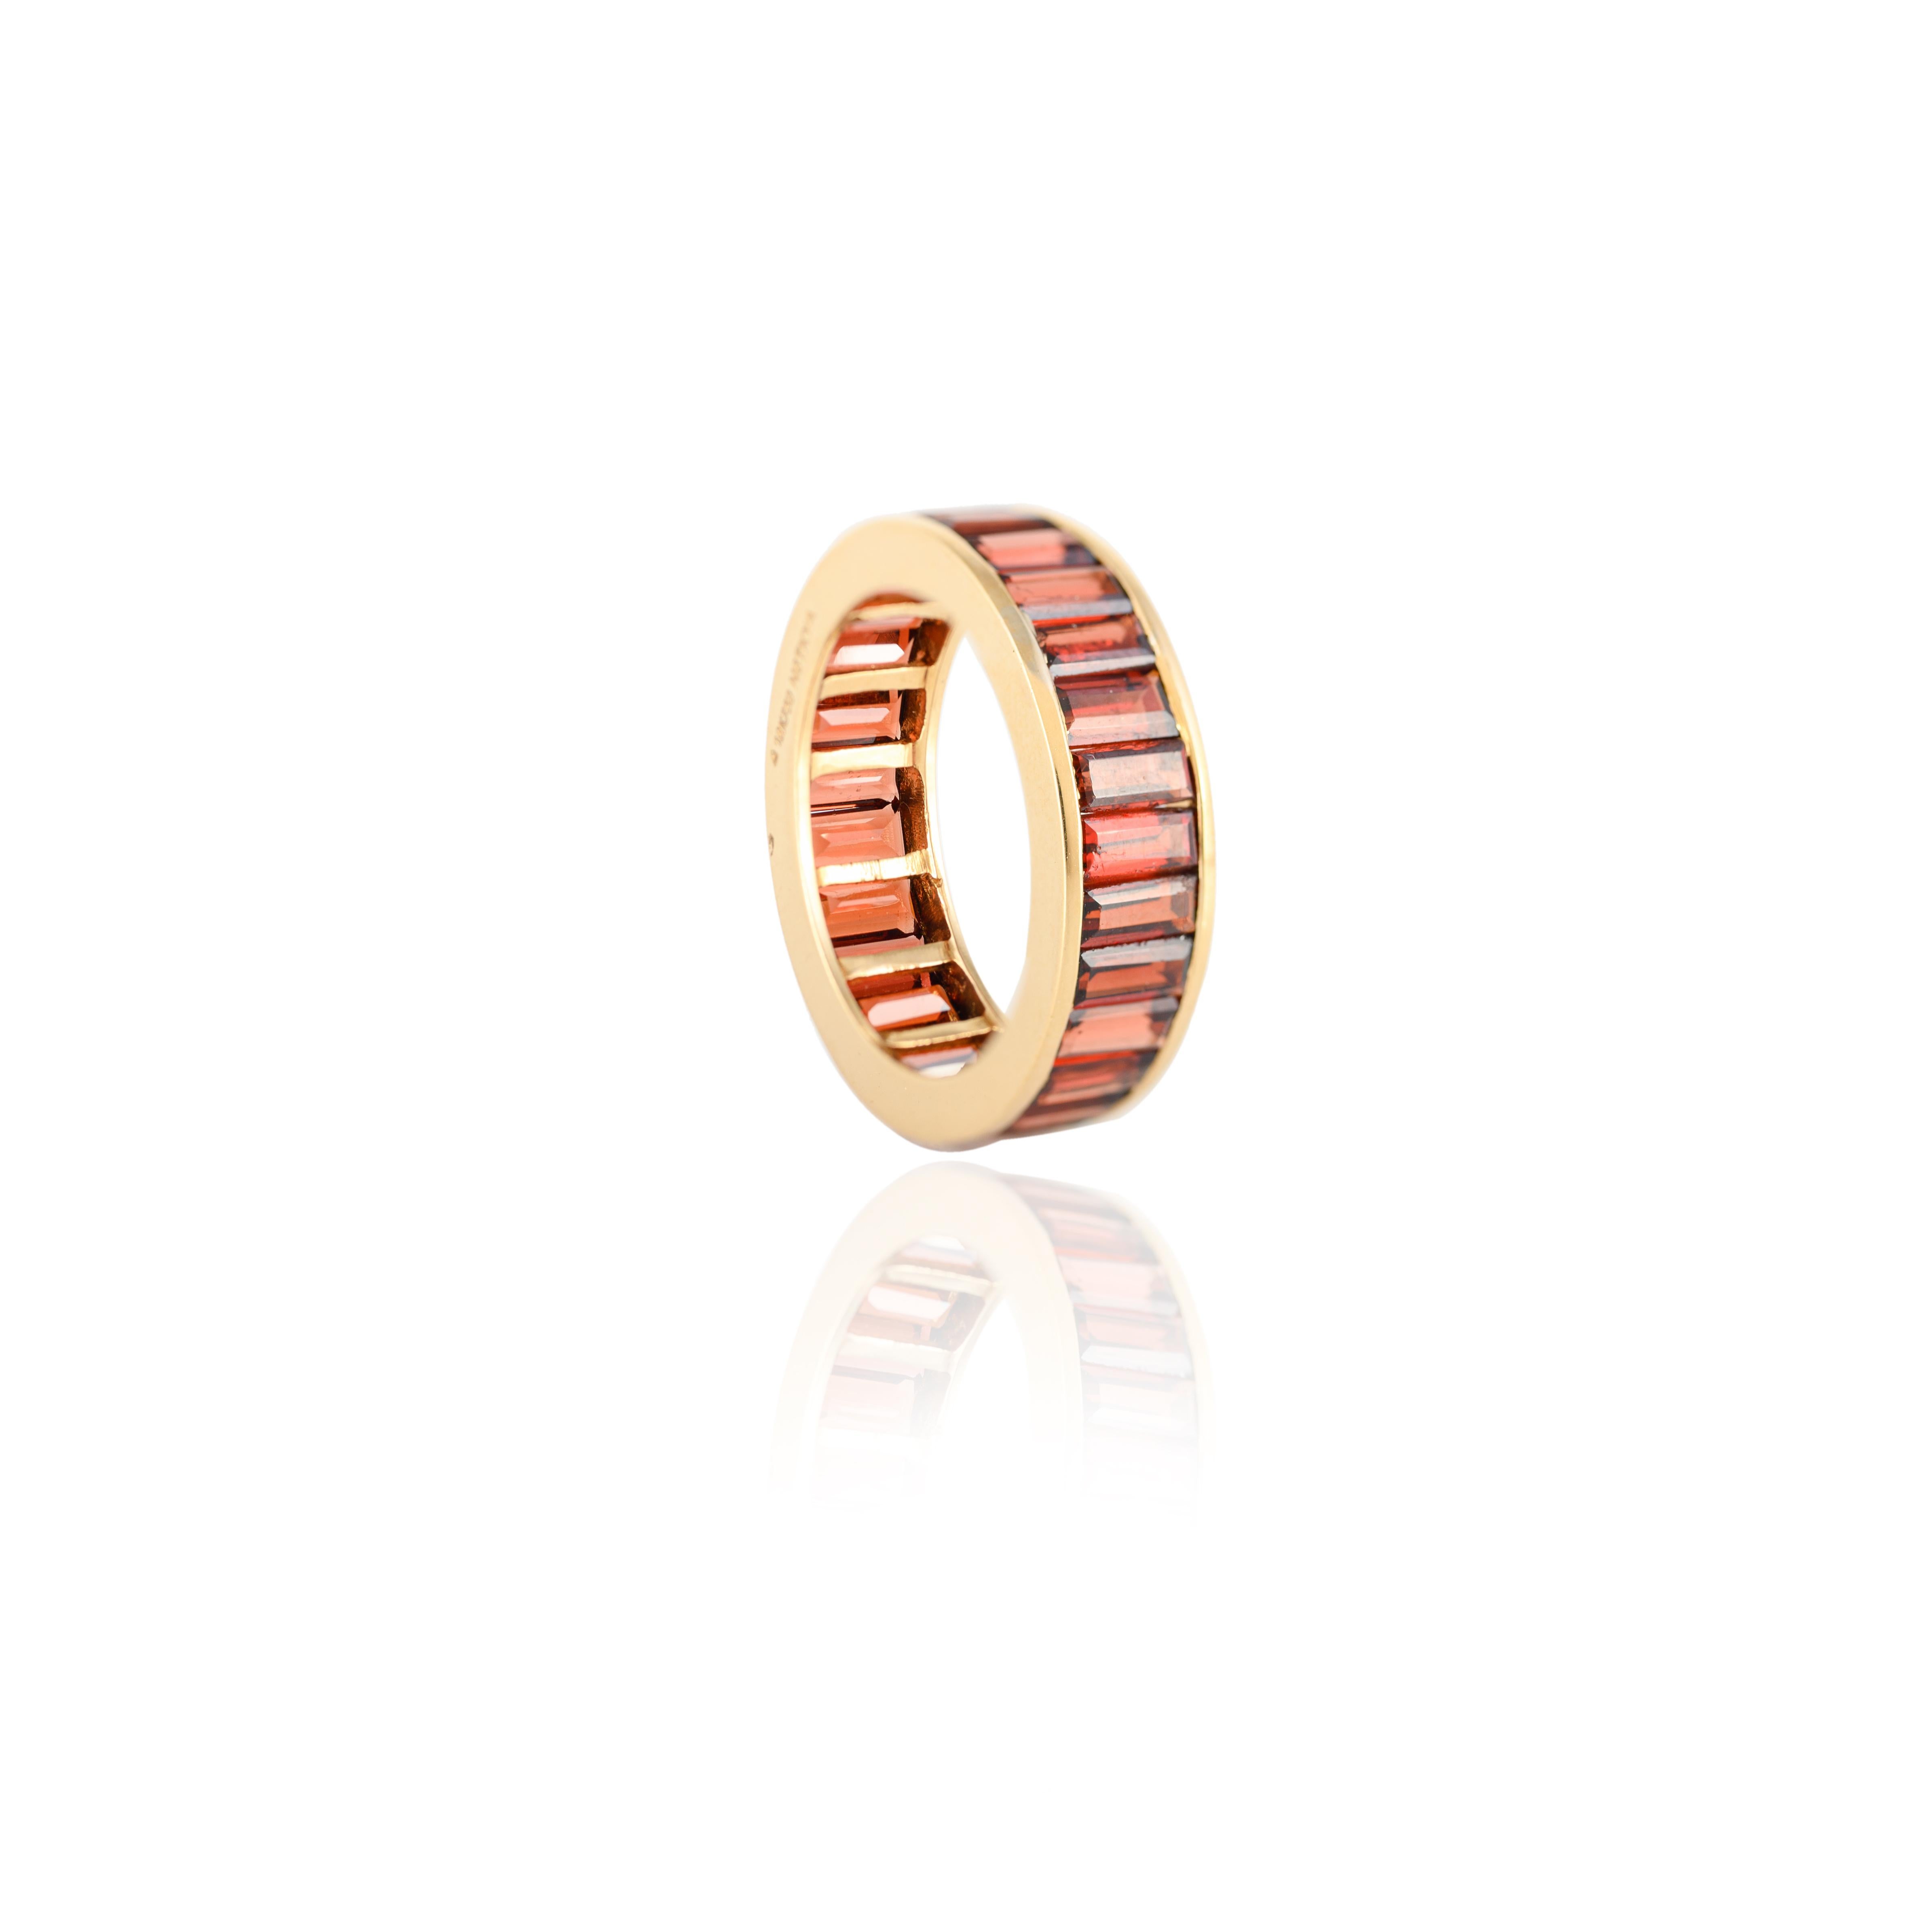 For Sale:  7.3 CT Garnet Gemstone Stacking Eternity Band Ring 18k Solid Yellow Gold 3